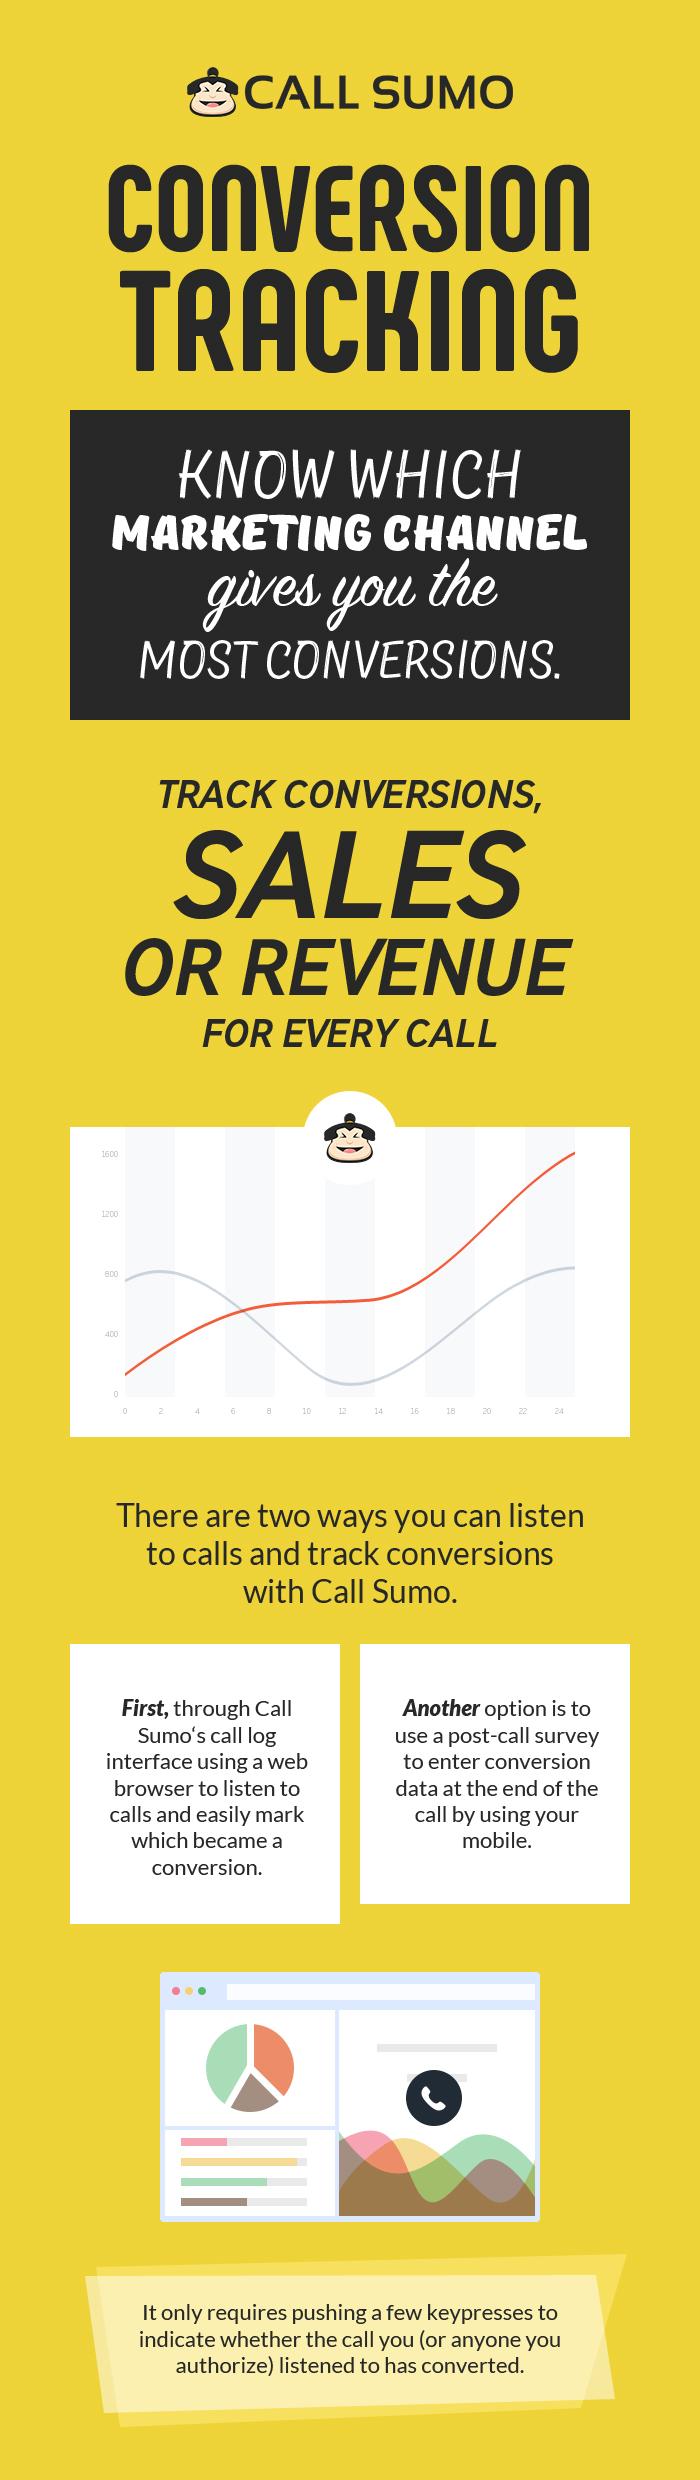 Track Conversion with Call Sumo’s Call Tracking Software